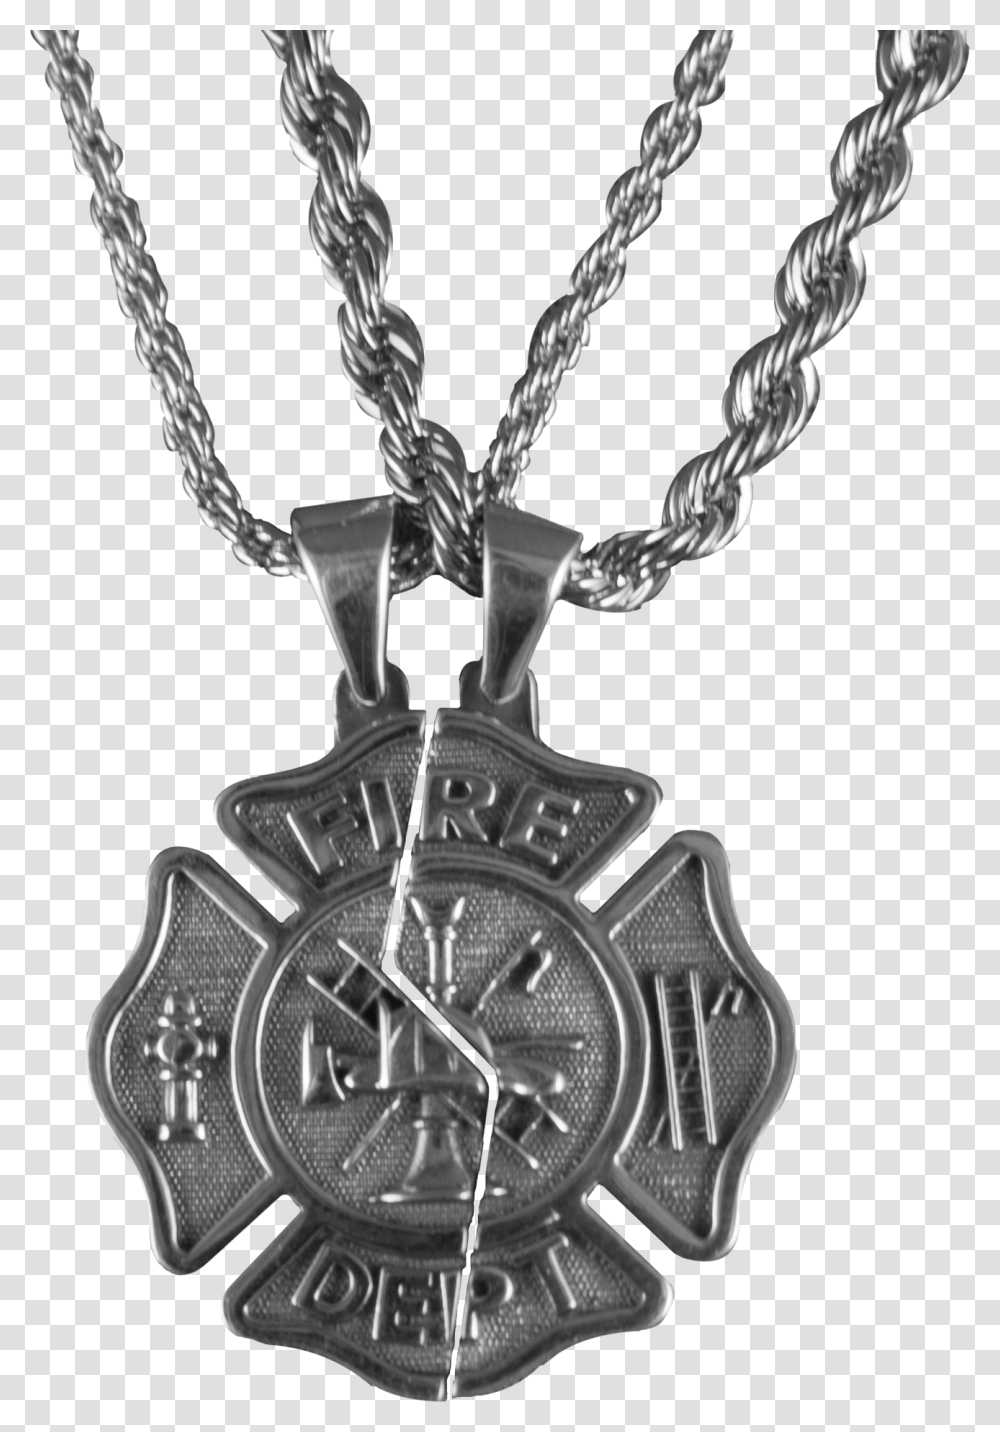 Maltese Cross Necklace, Jewelry, Accessories, Accessory, Pendant Transparent Png